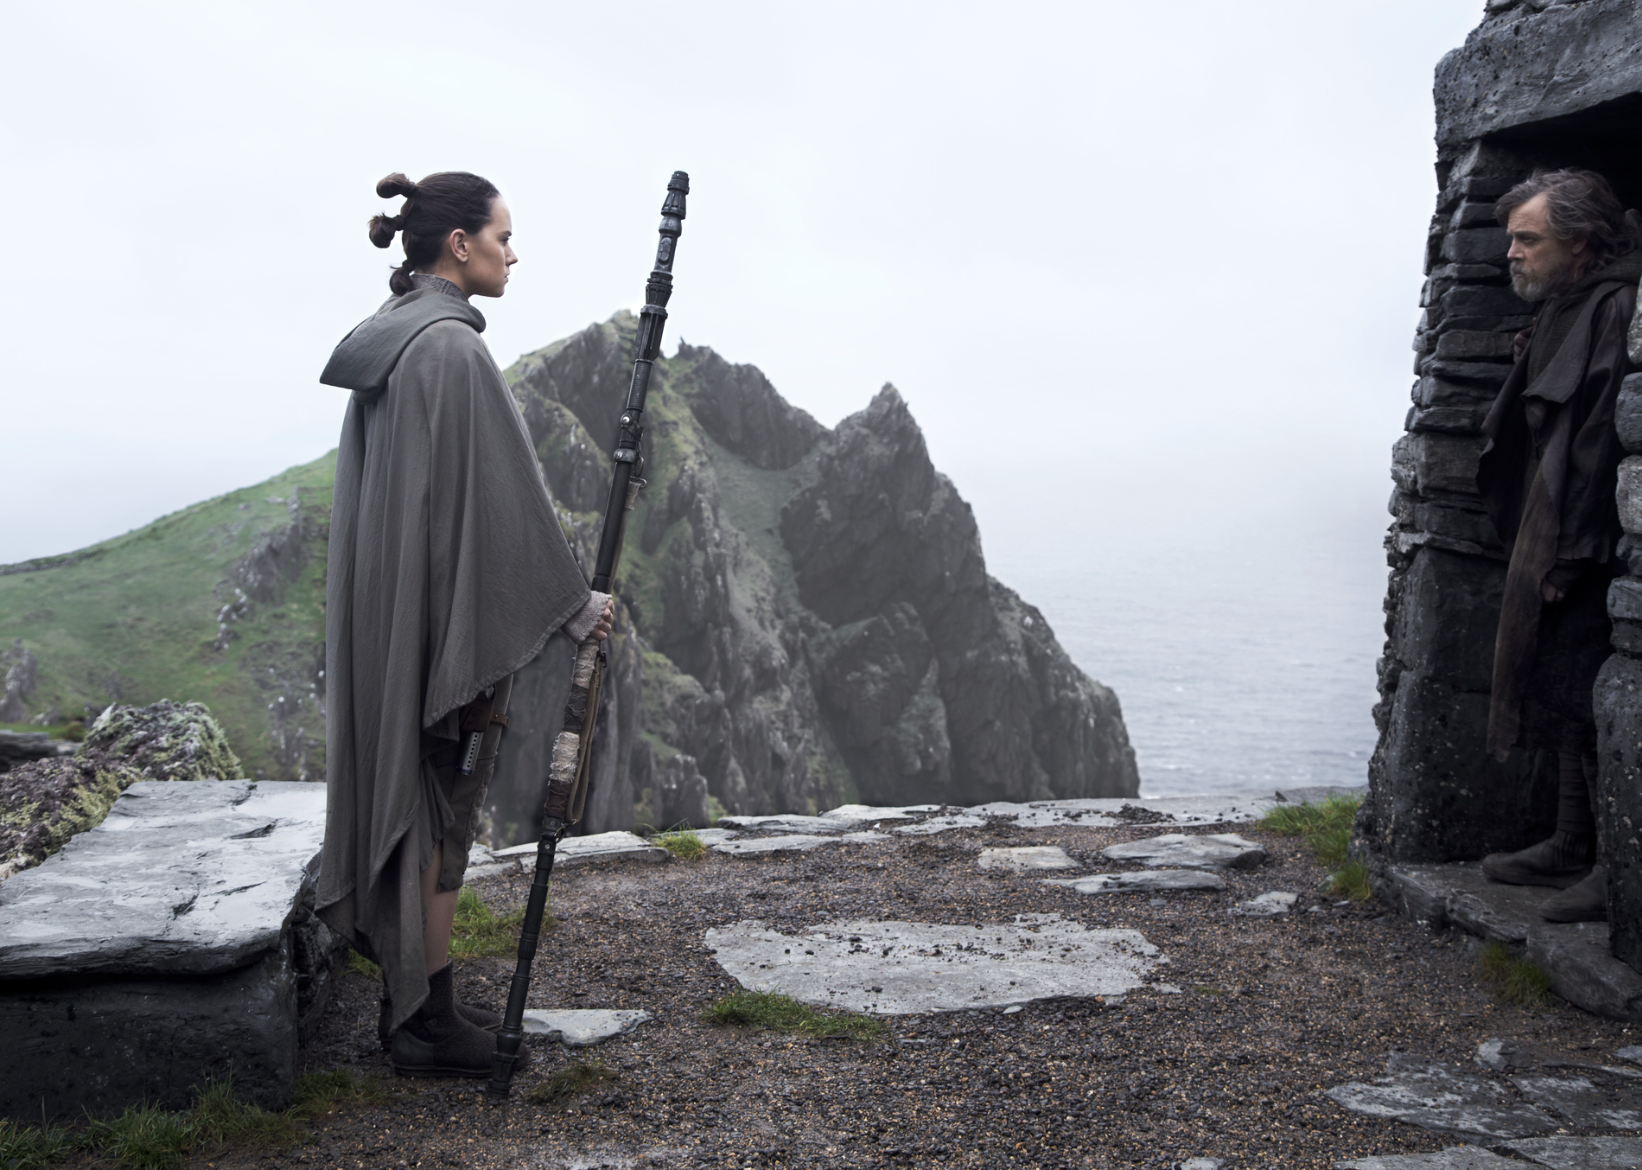 Mark Hamill and Daisy Ridley in "Star Wars: Episode VIII - The Last Jedi"